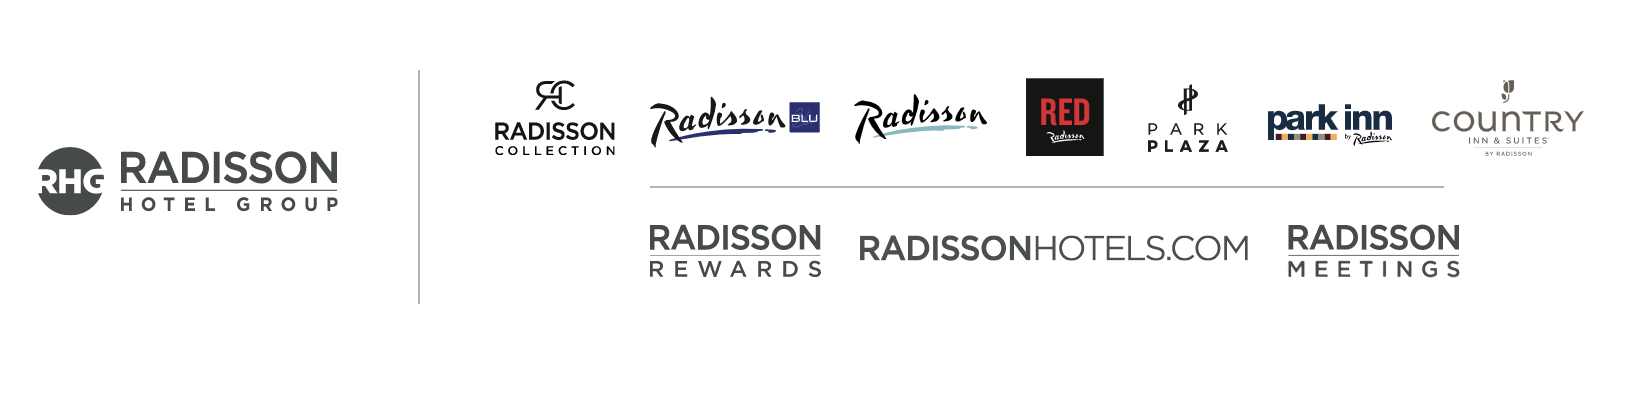 radisson hotel brands include almost 10 hotels within the radisson chain